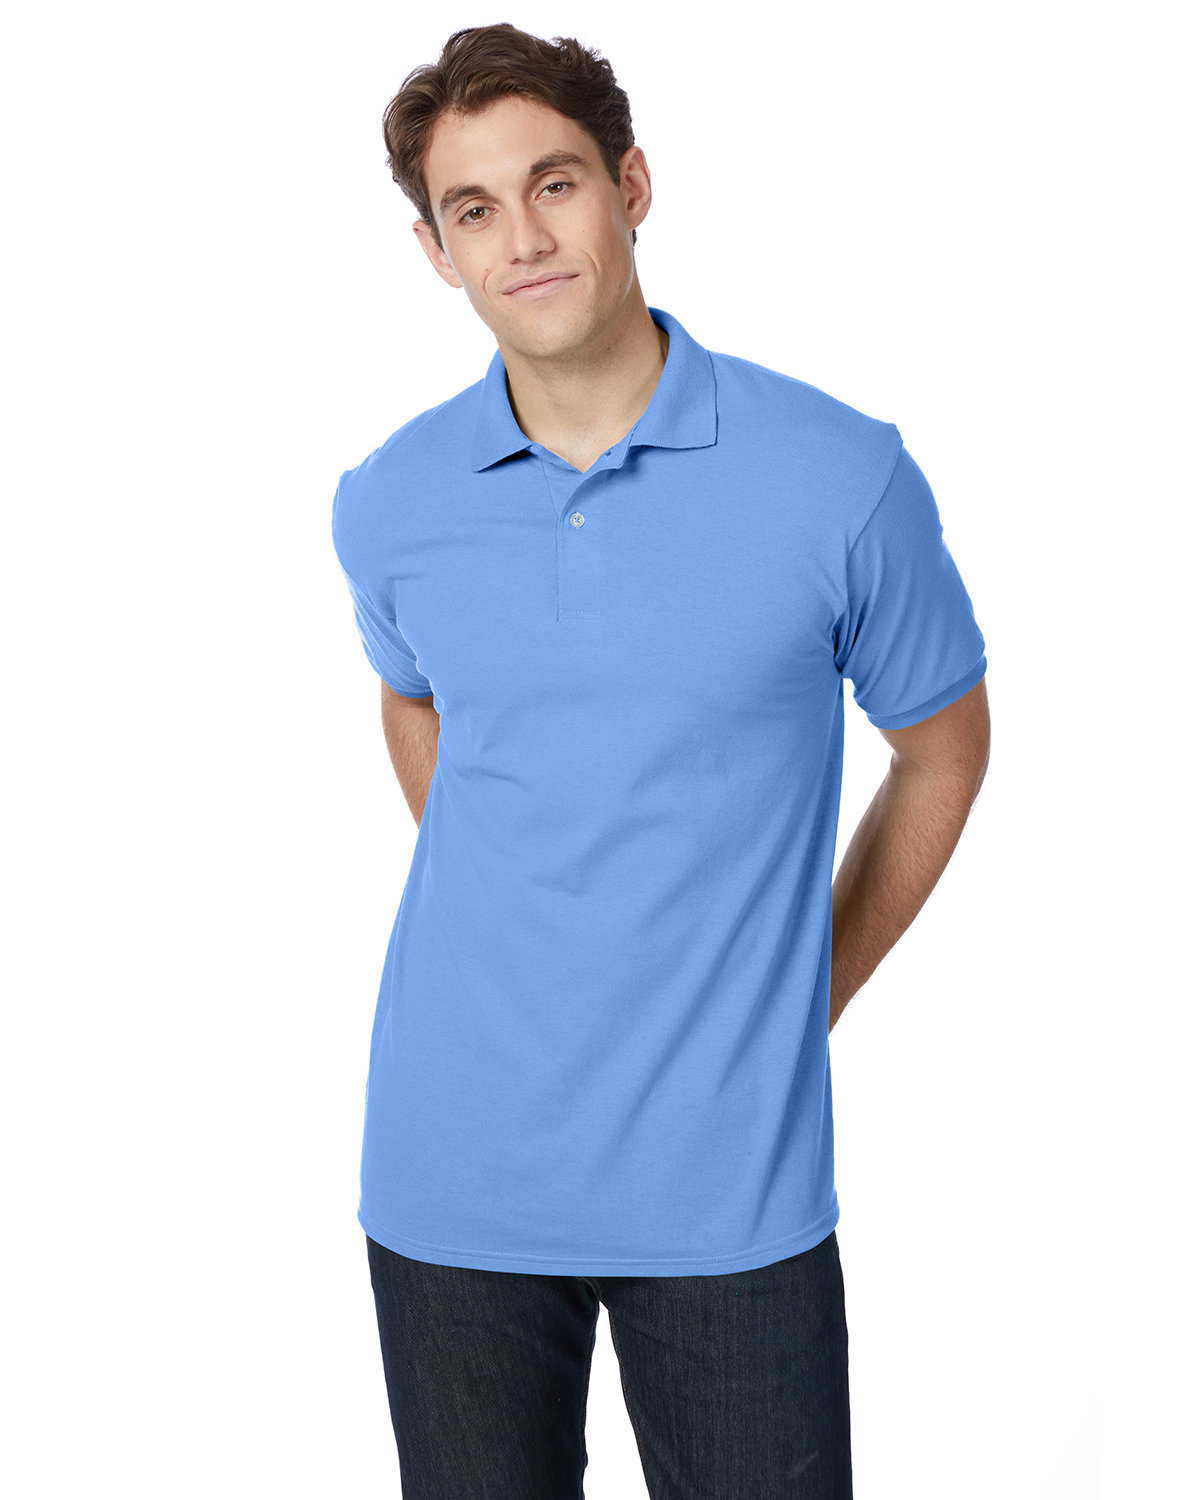 Hanes Adult 50/50 EcoSmart® Jersey Polo Knit alphabroder 